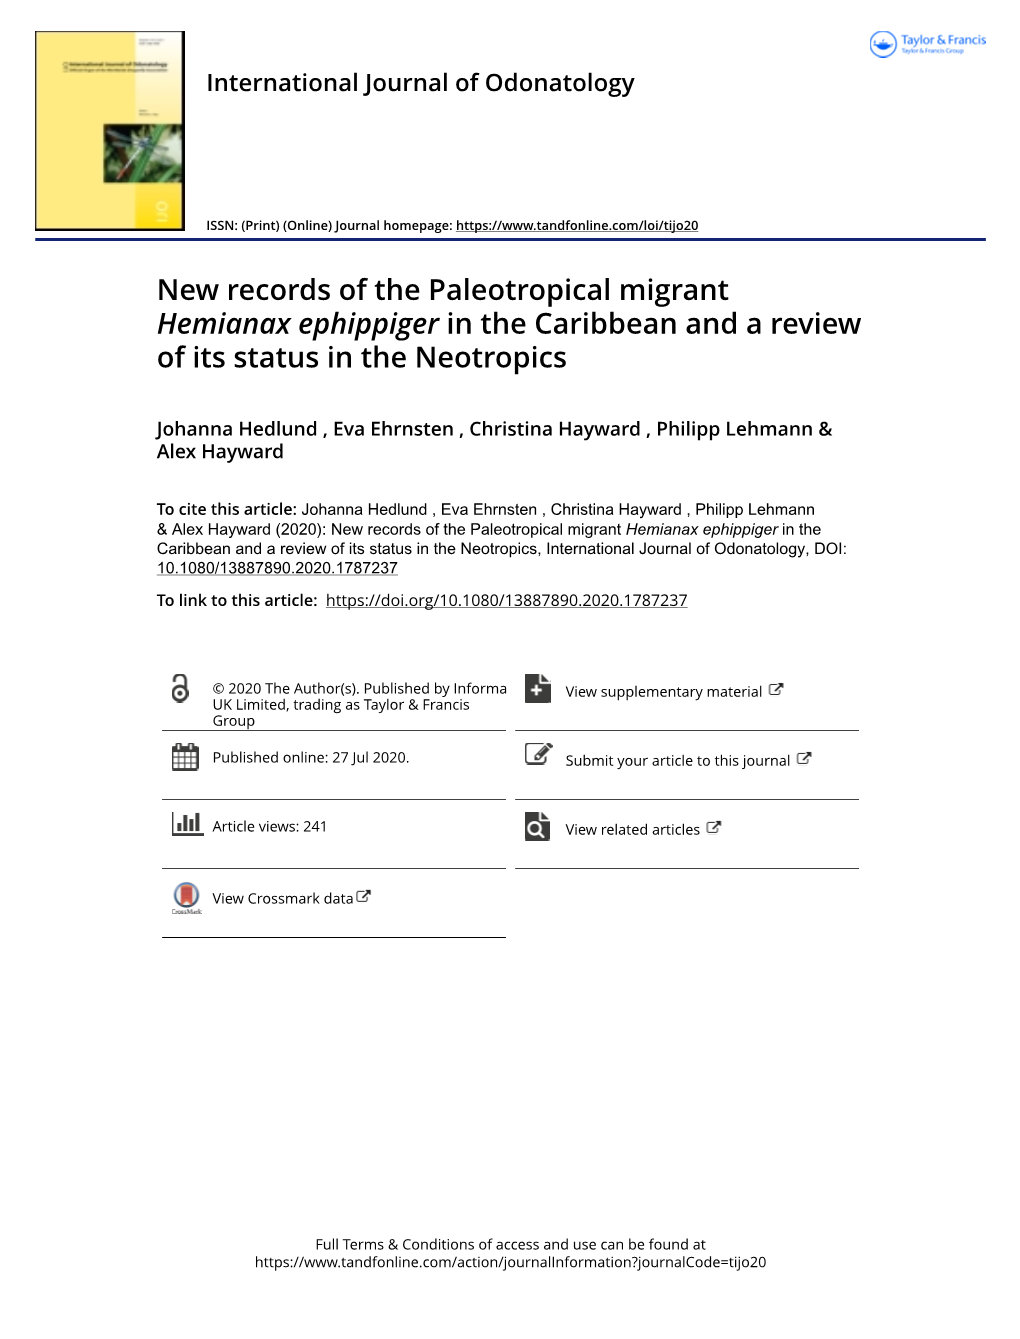 New Records of the Paleotropical Migrant Hemianax Ephippiger in the Caribbean and a Review of Its Status in the Neotropics